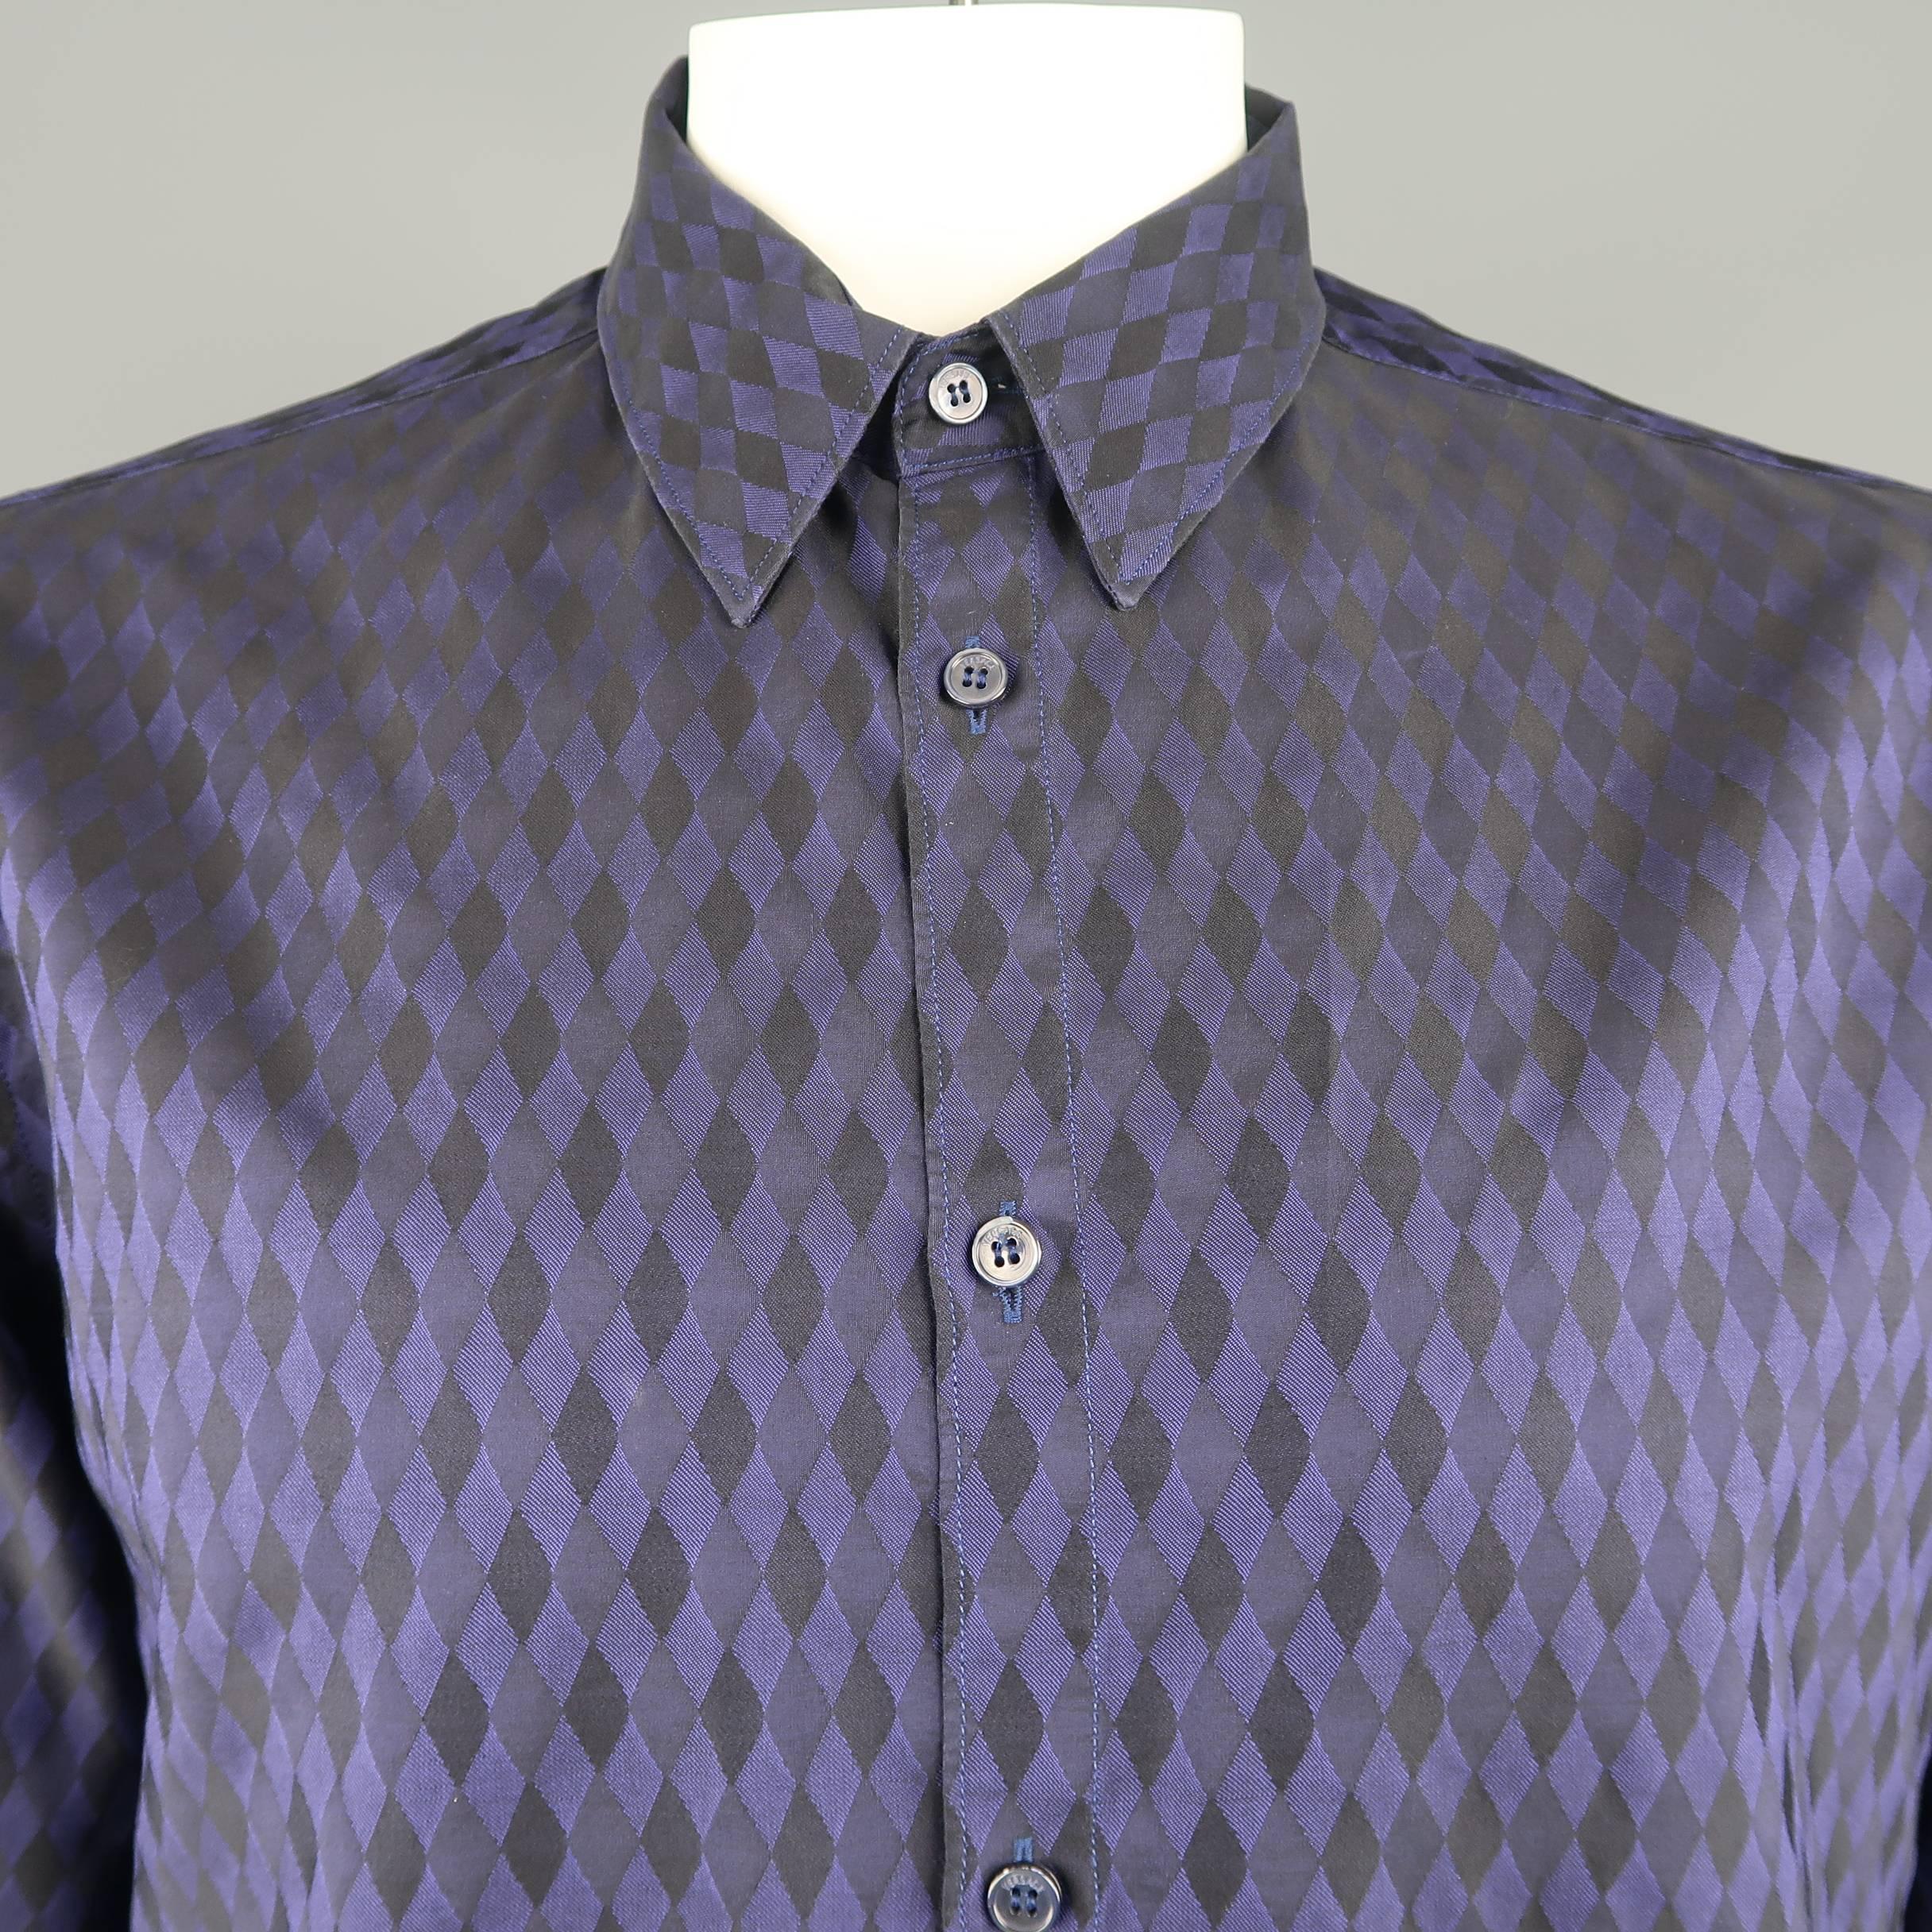 Versace dress shirt comes in indigo purple cotton with a pointed collar and all over Harlequin diamond checkered pattern. Made in Italy.
 
Excellent Pre-Owned Condition.
Marked: 42 / 16.5
 
Measurements:
 
Shoulder: 19 in.
Chest 48 in.
Sleeve: 28